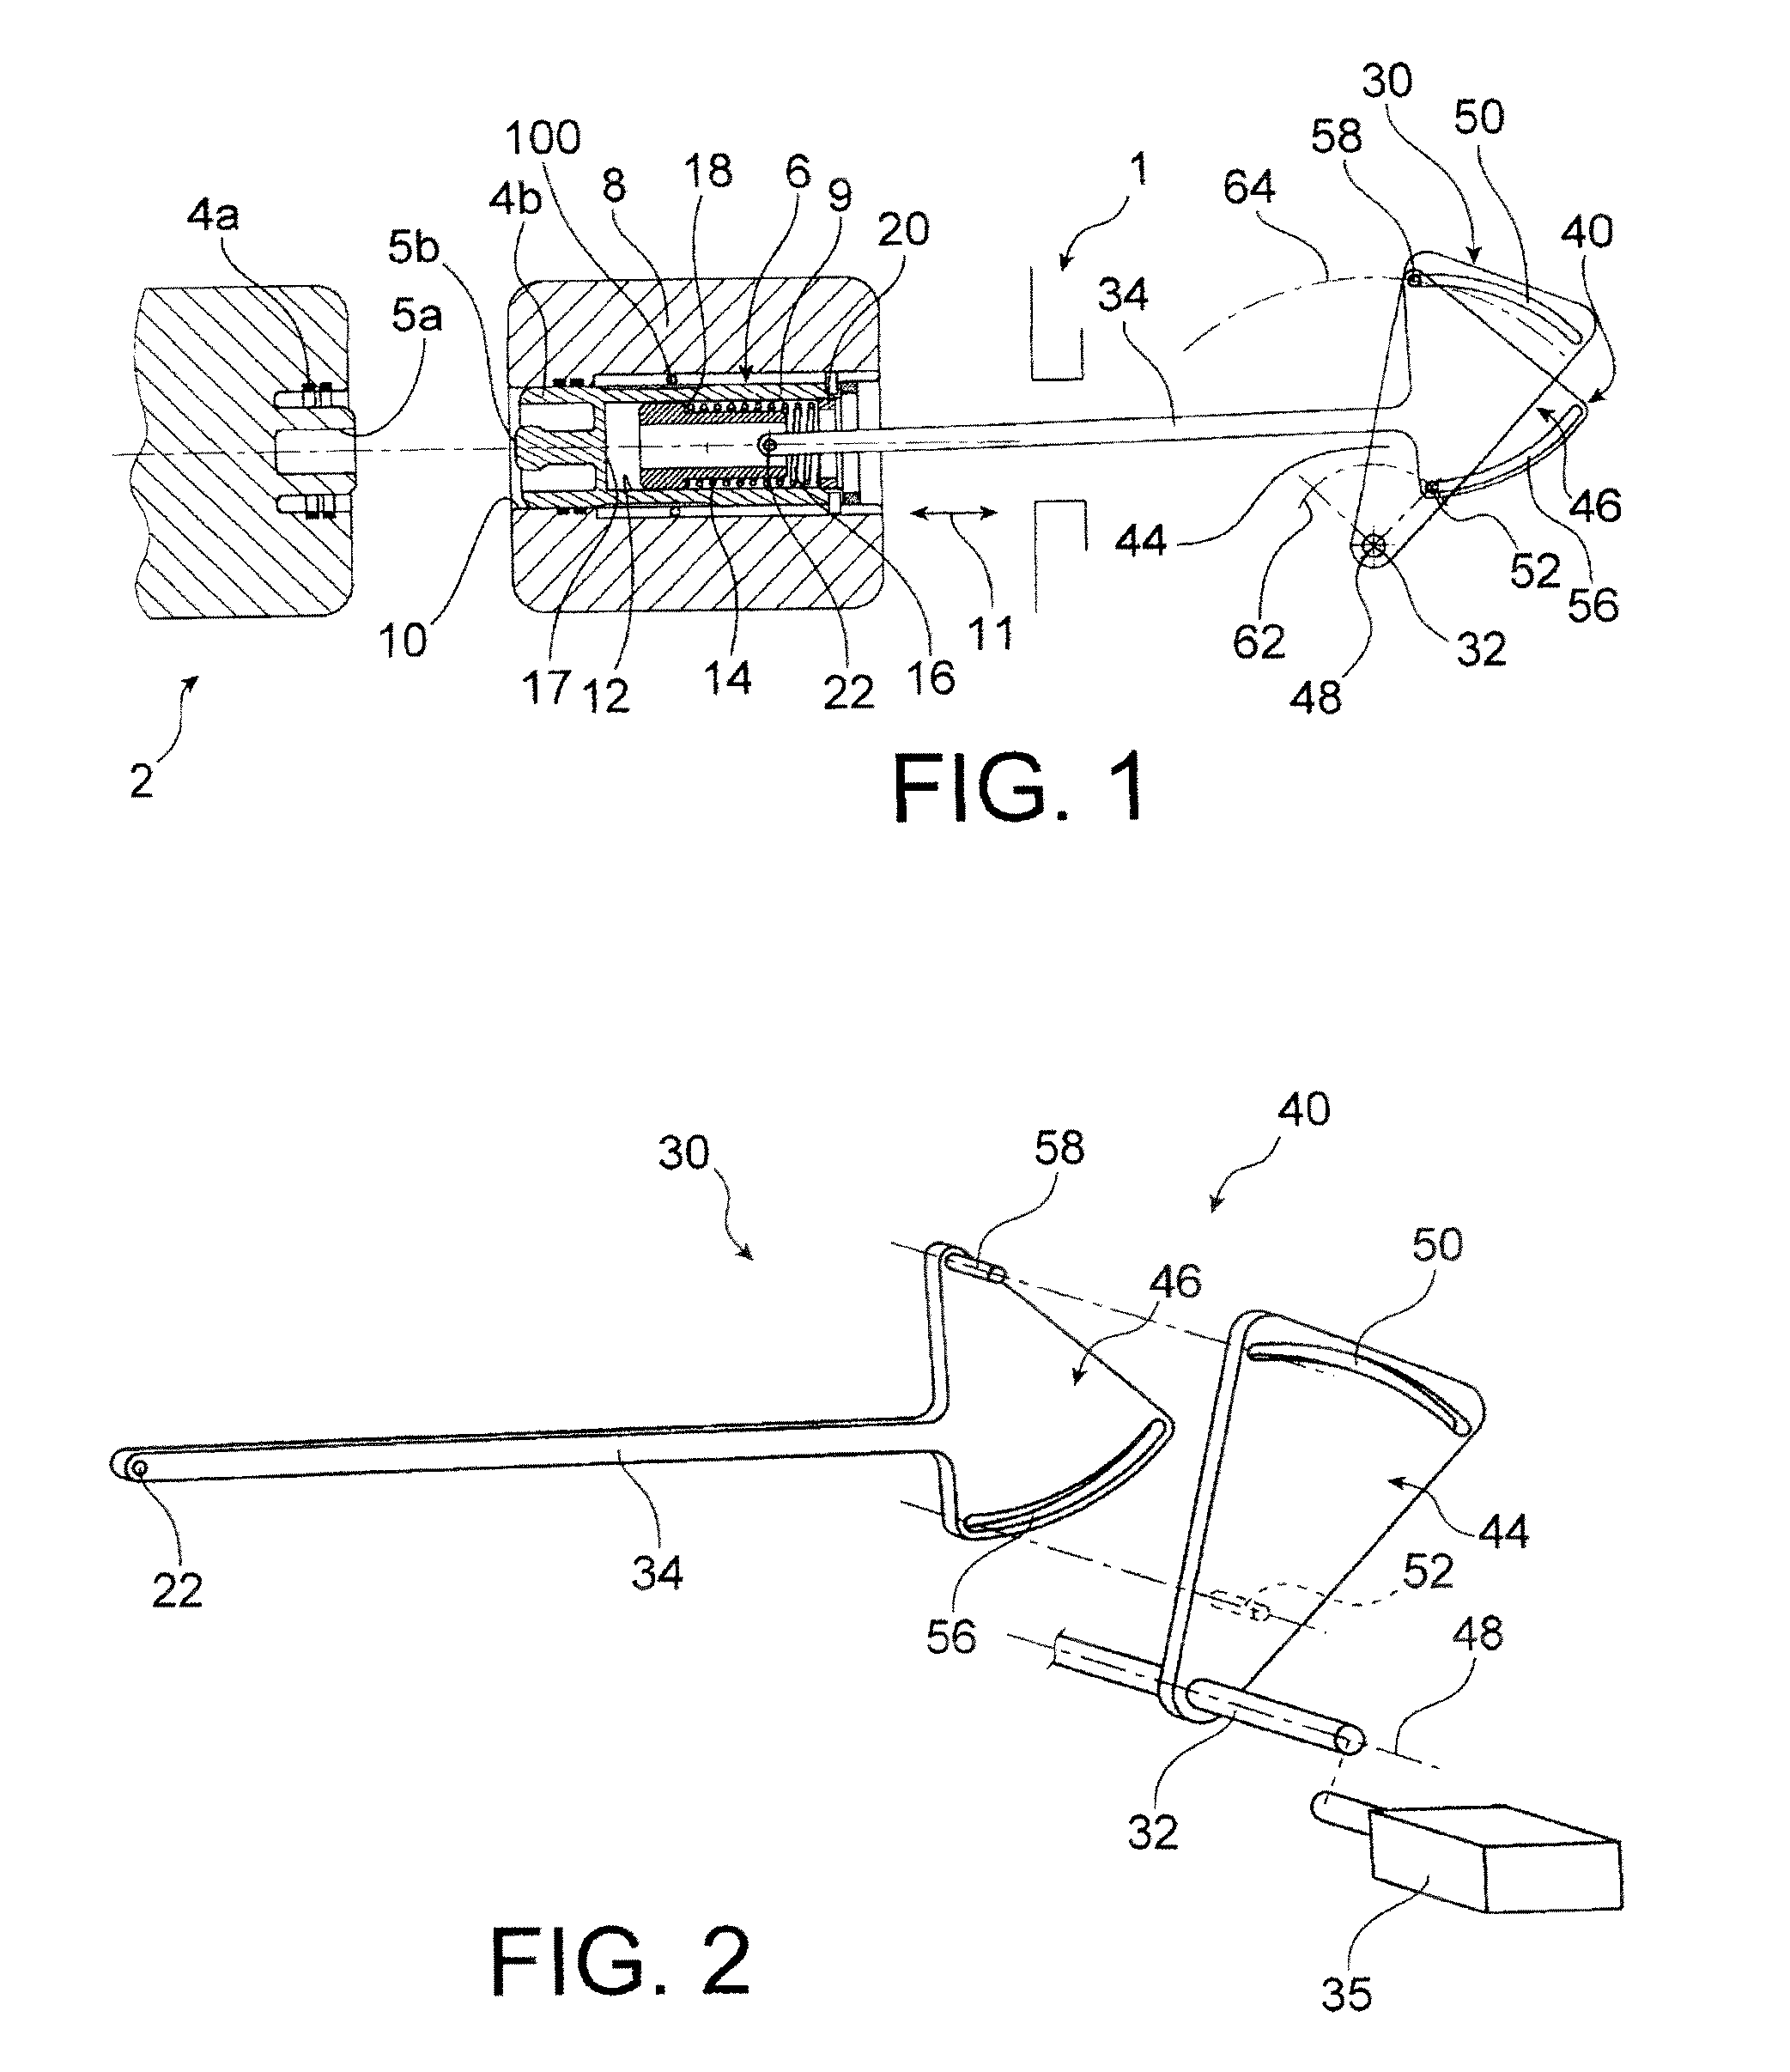 Mobile Conducting Unit for a Breaker, Including a Spring for Accelerating the Separation of Arc Contacts